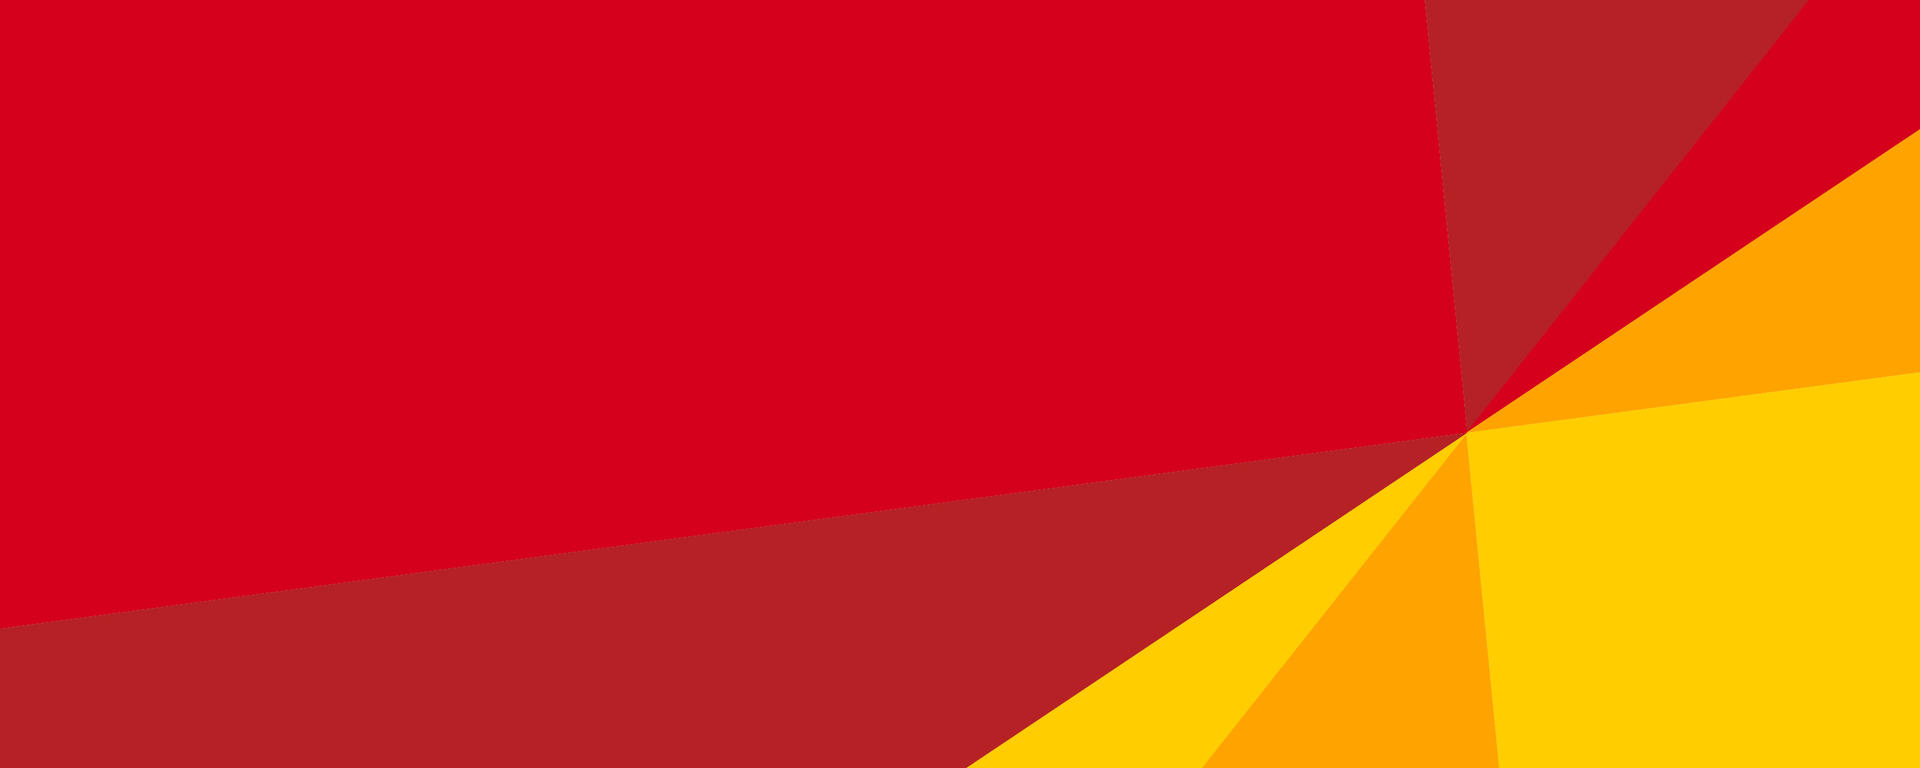 A background with yellow and red geometric angles